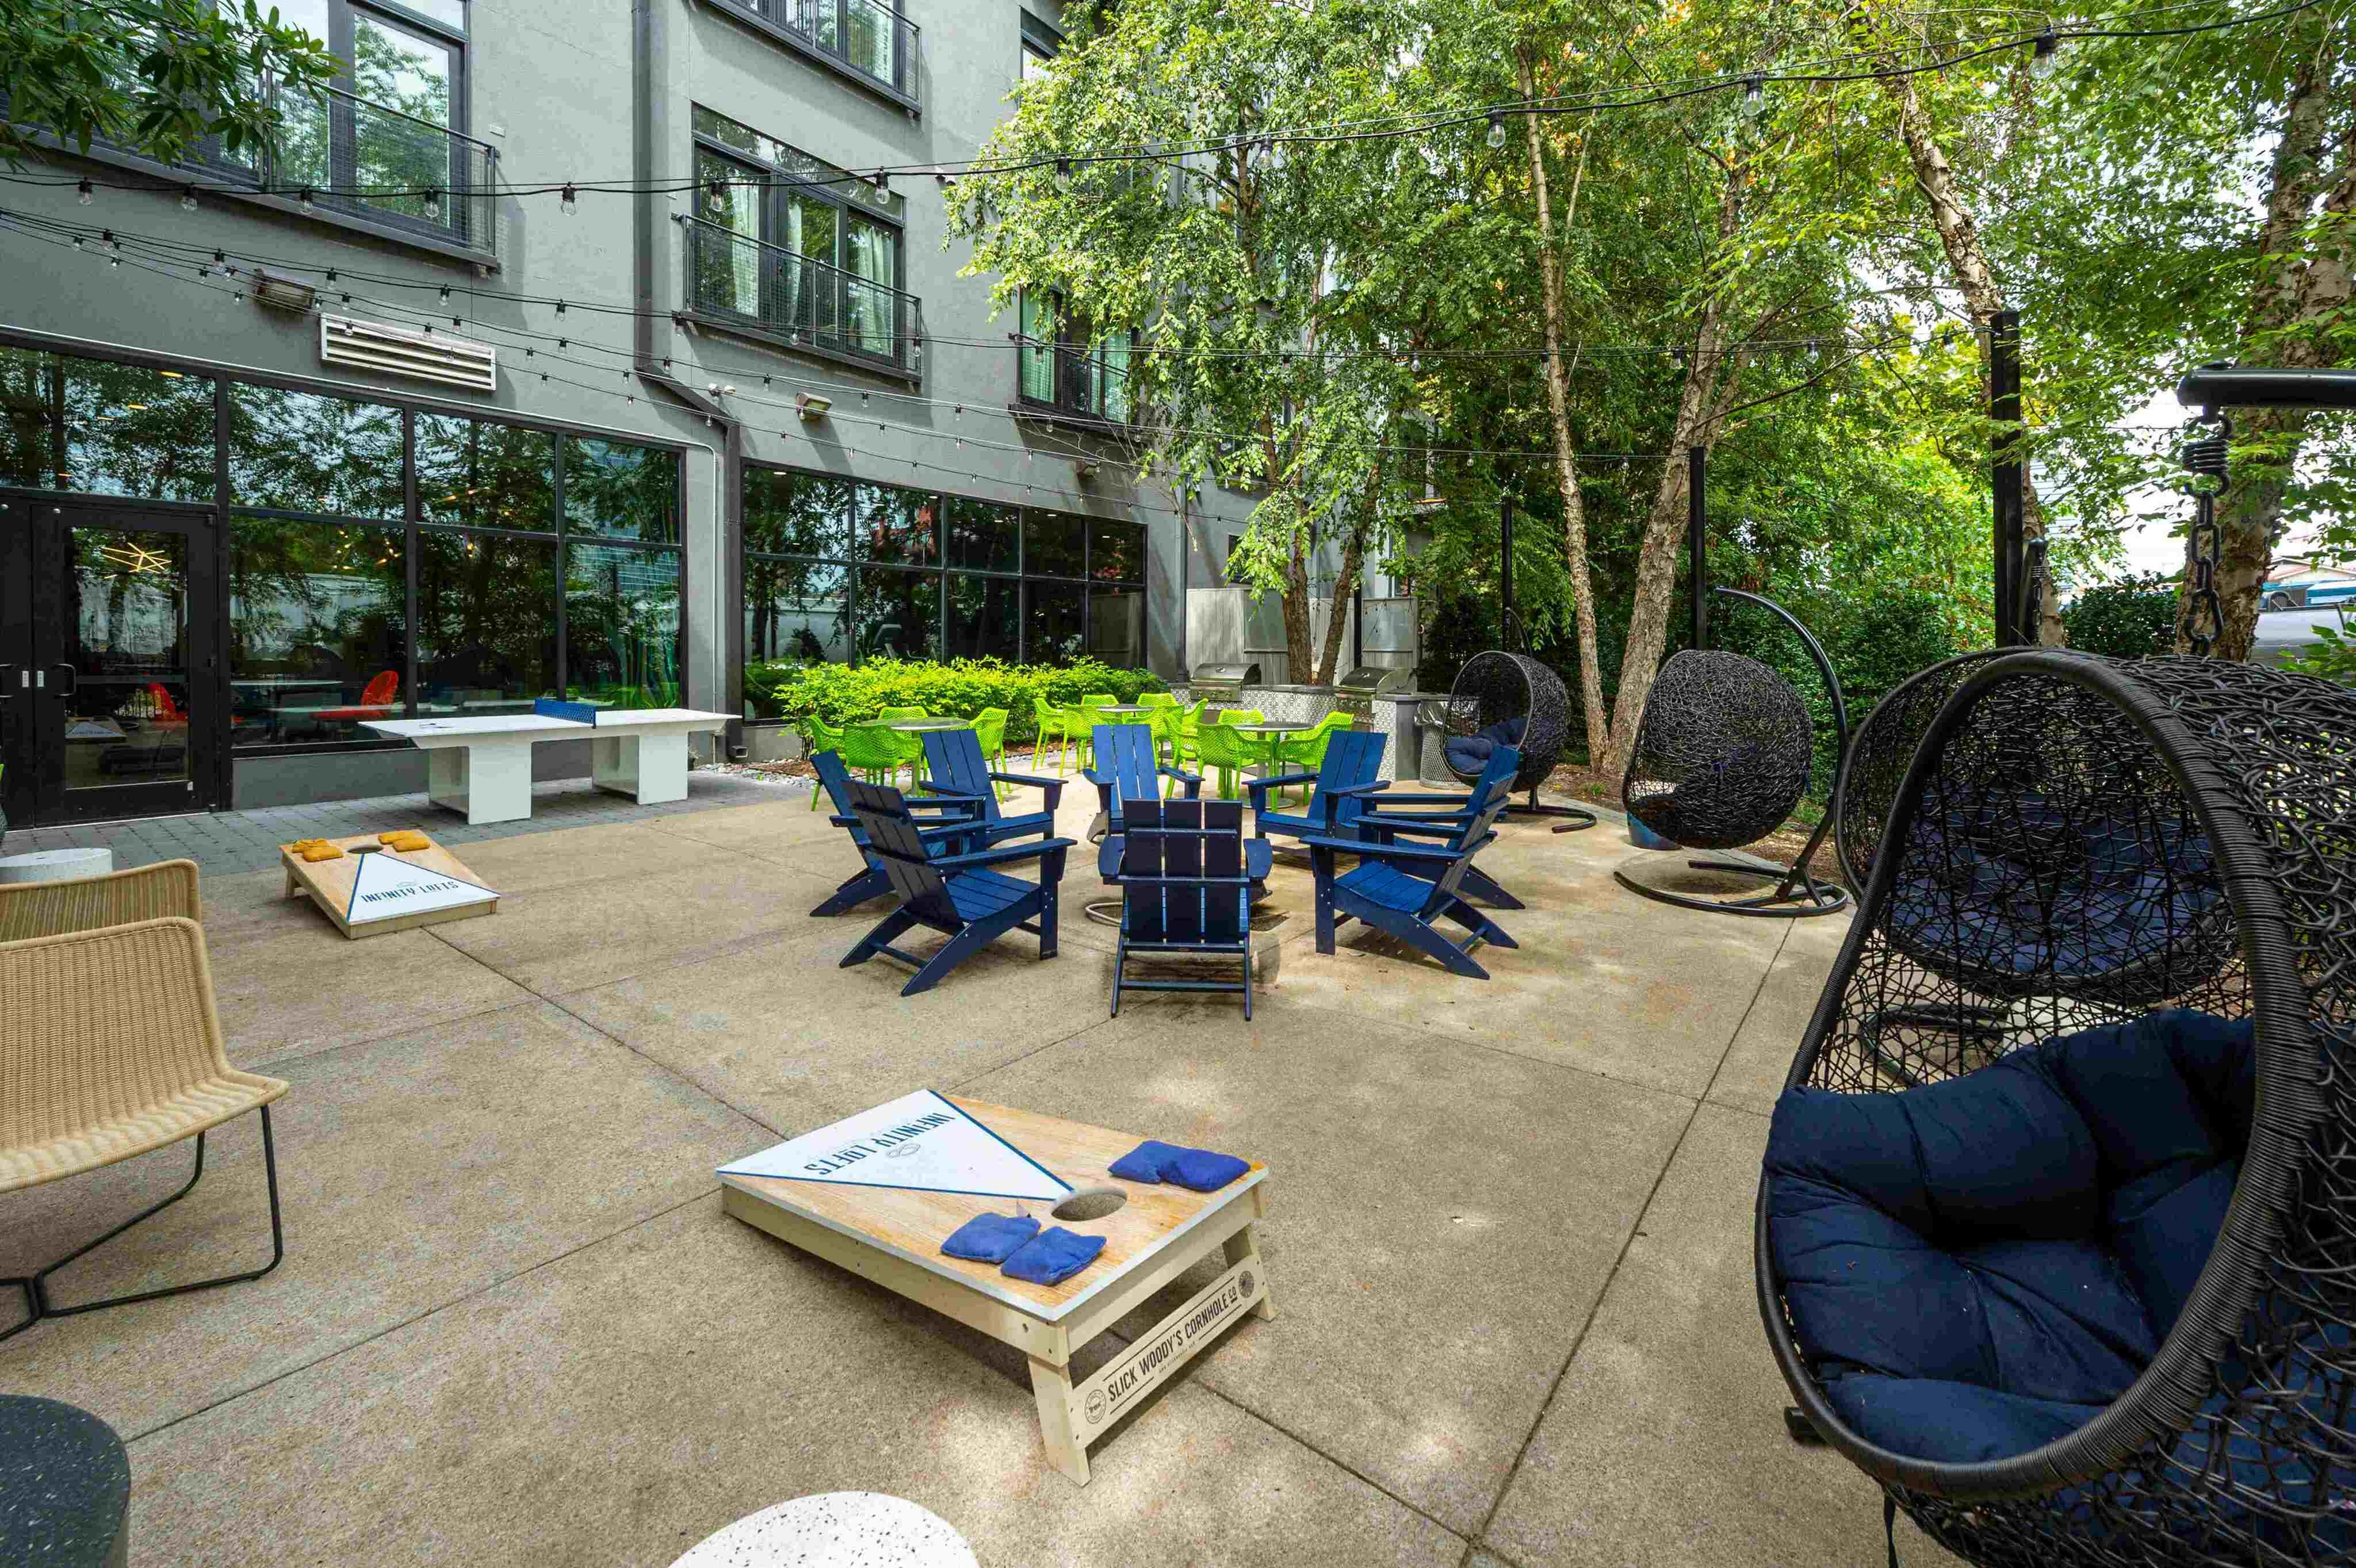 Outdoor courtyard with BBQ grills, fire pit, and games